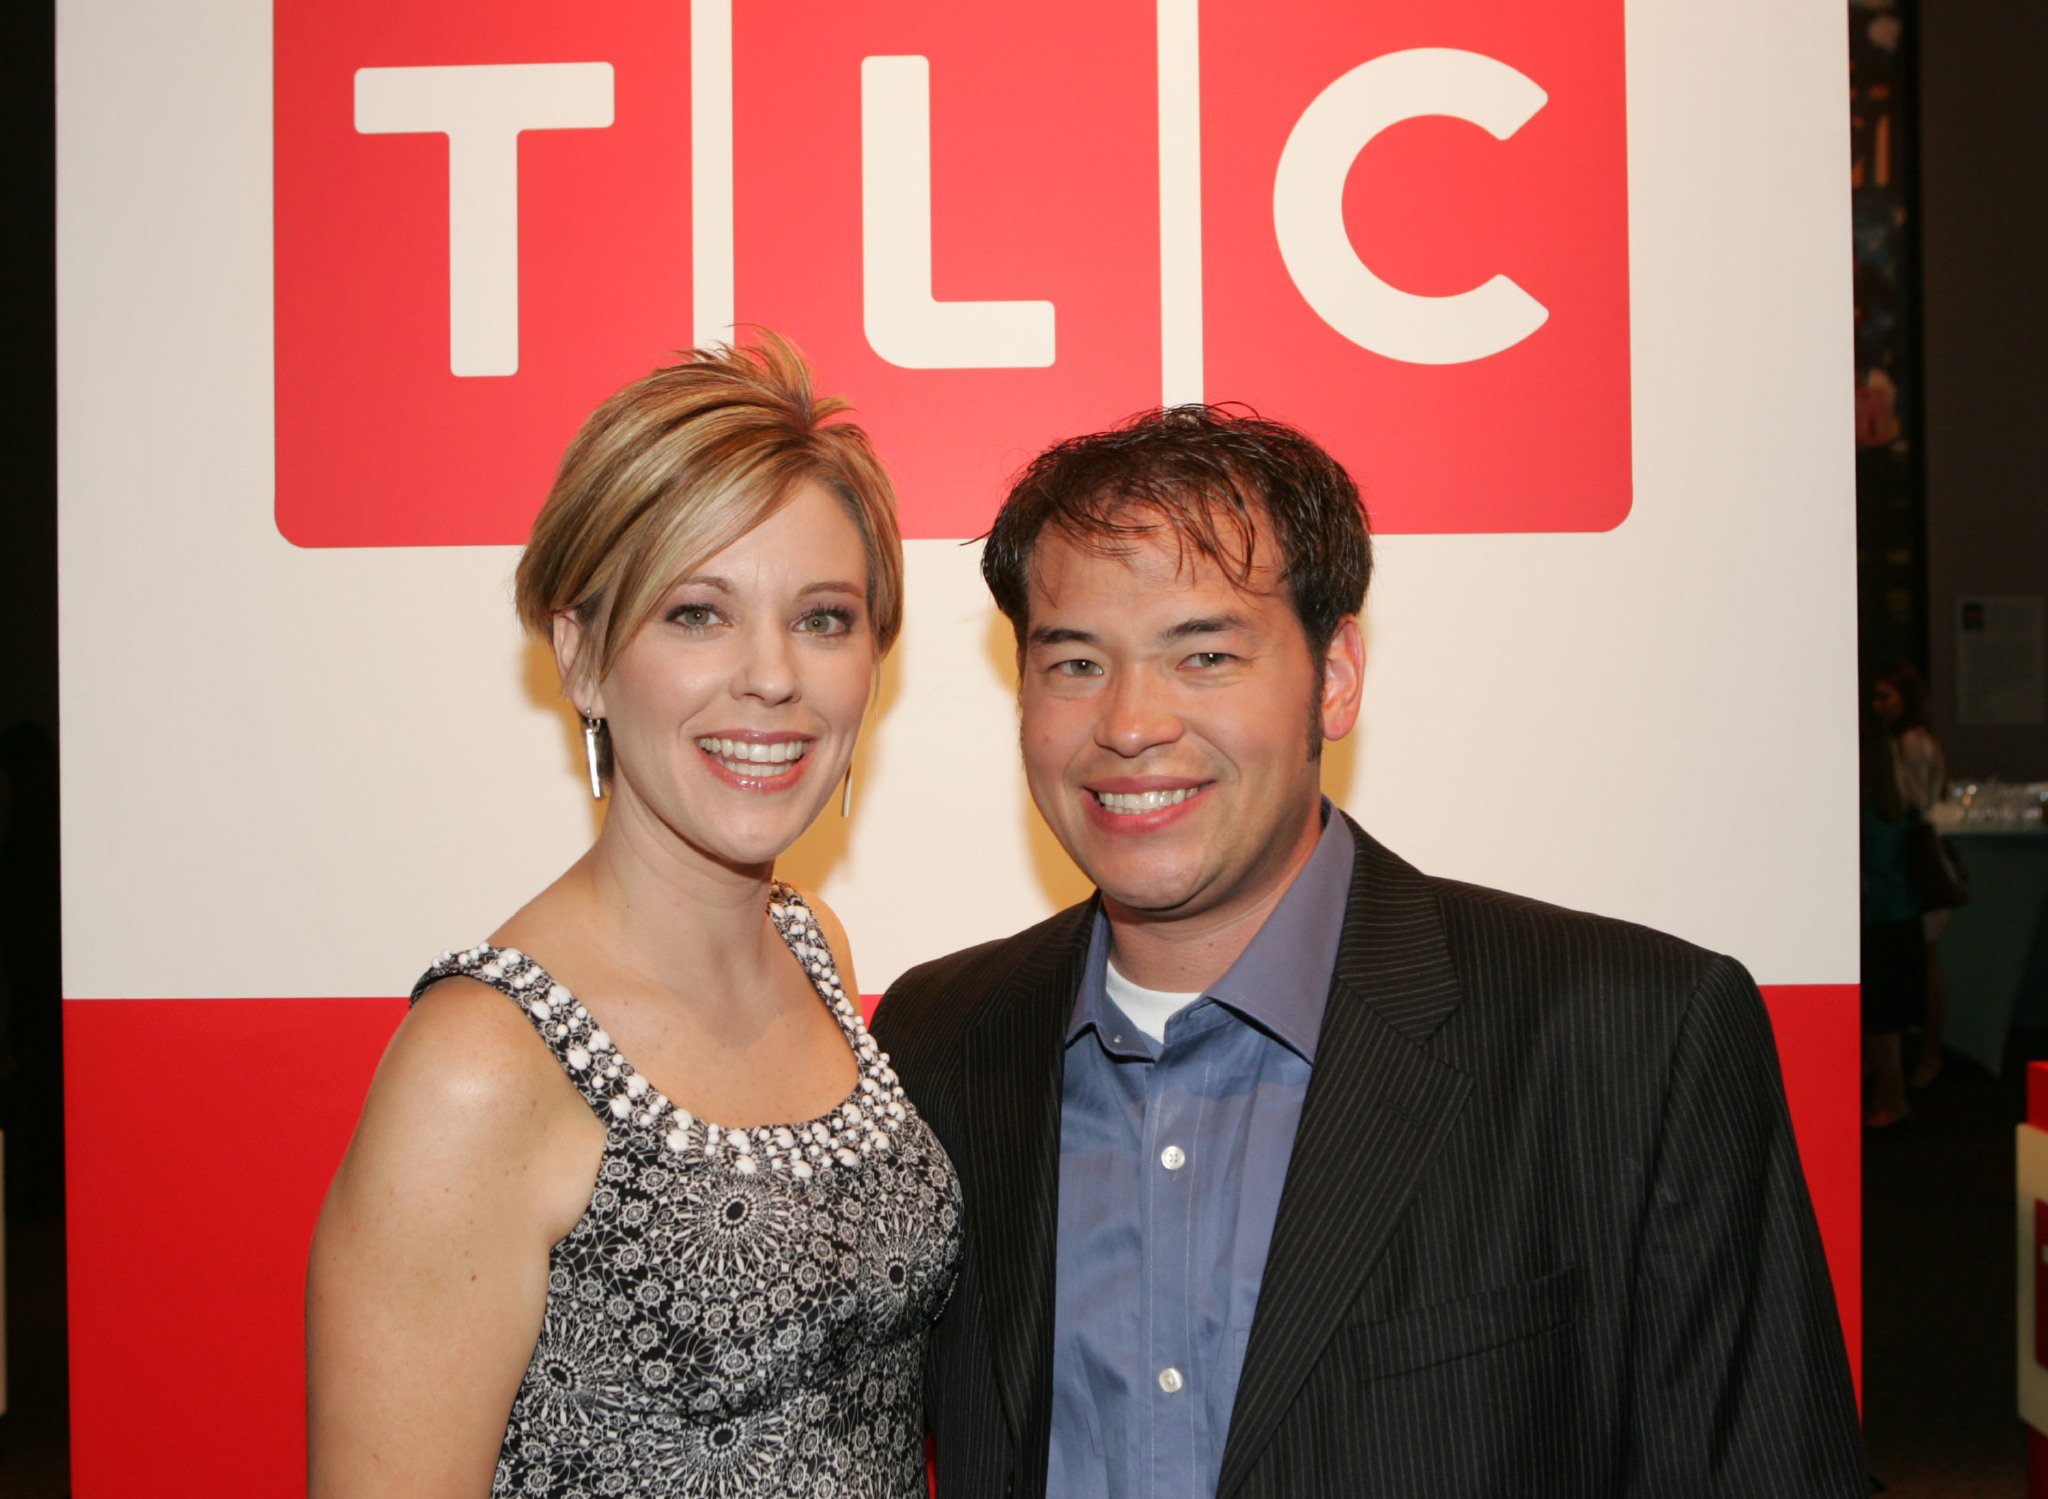  Television personalities John and Kate Gosselin attend the Discovery Upfront Presentation NY - Talent Images at the Frederick P. Rose Hall on April 23, 2008 | Photo: Getty Images